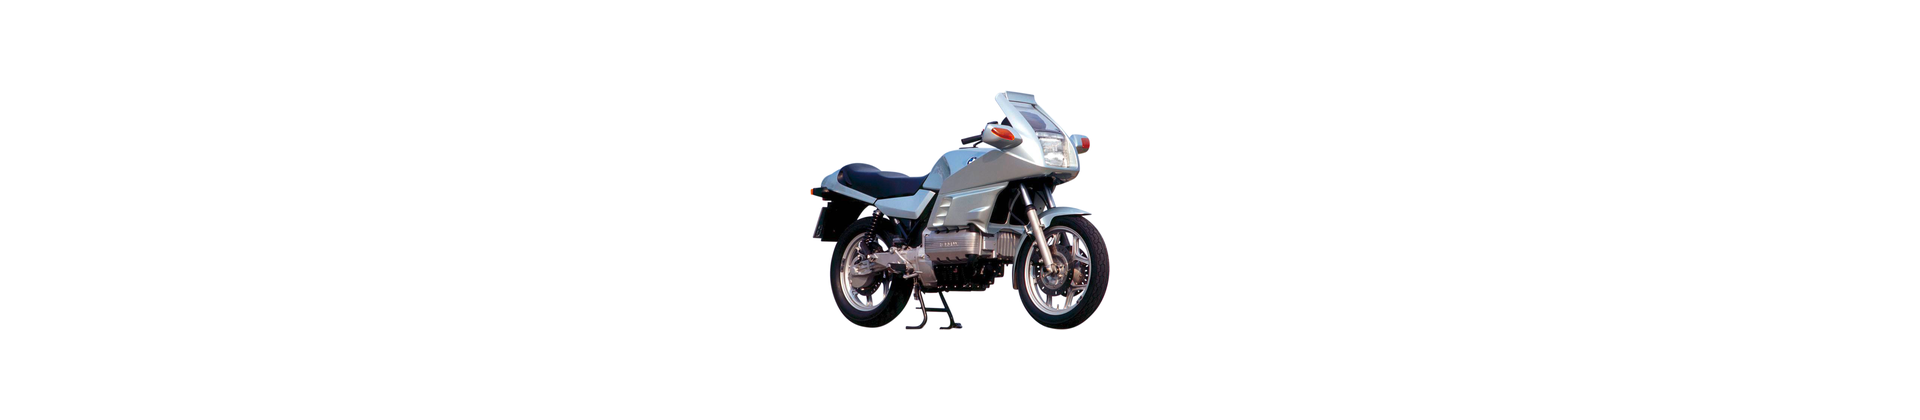 K100RS 1990-1992